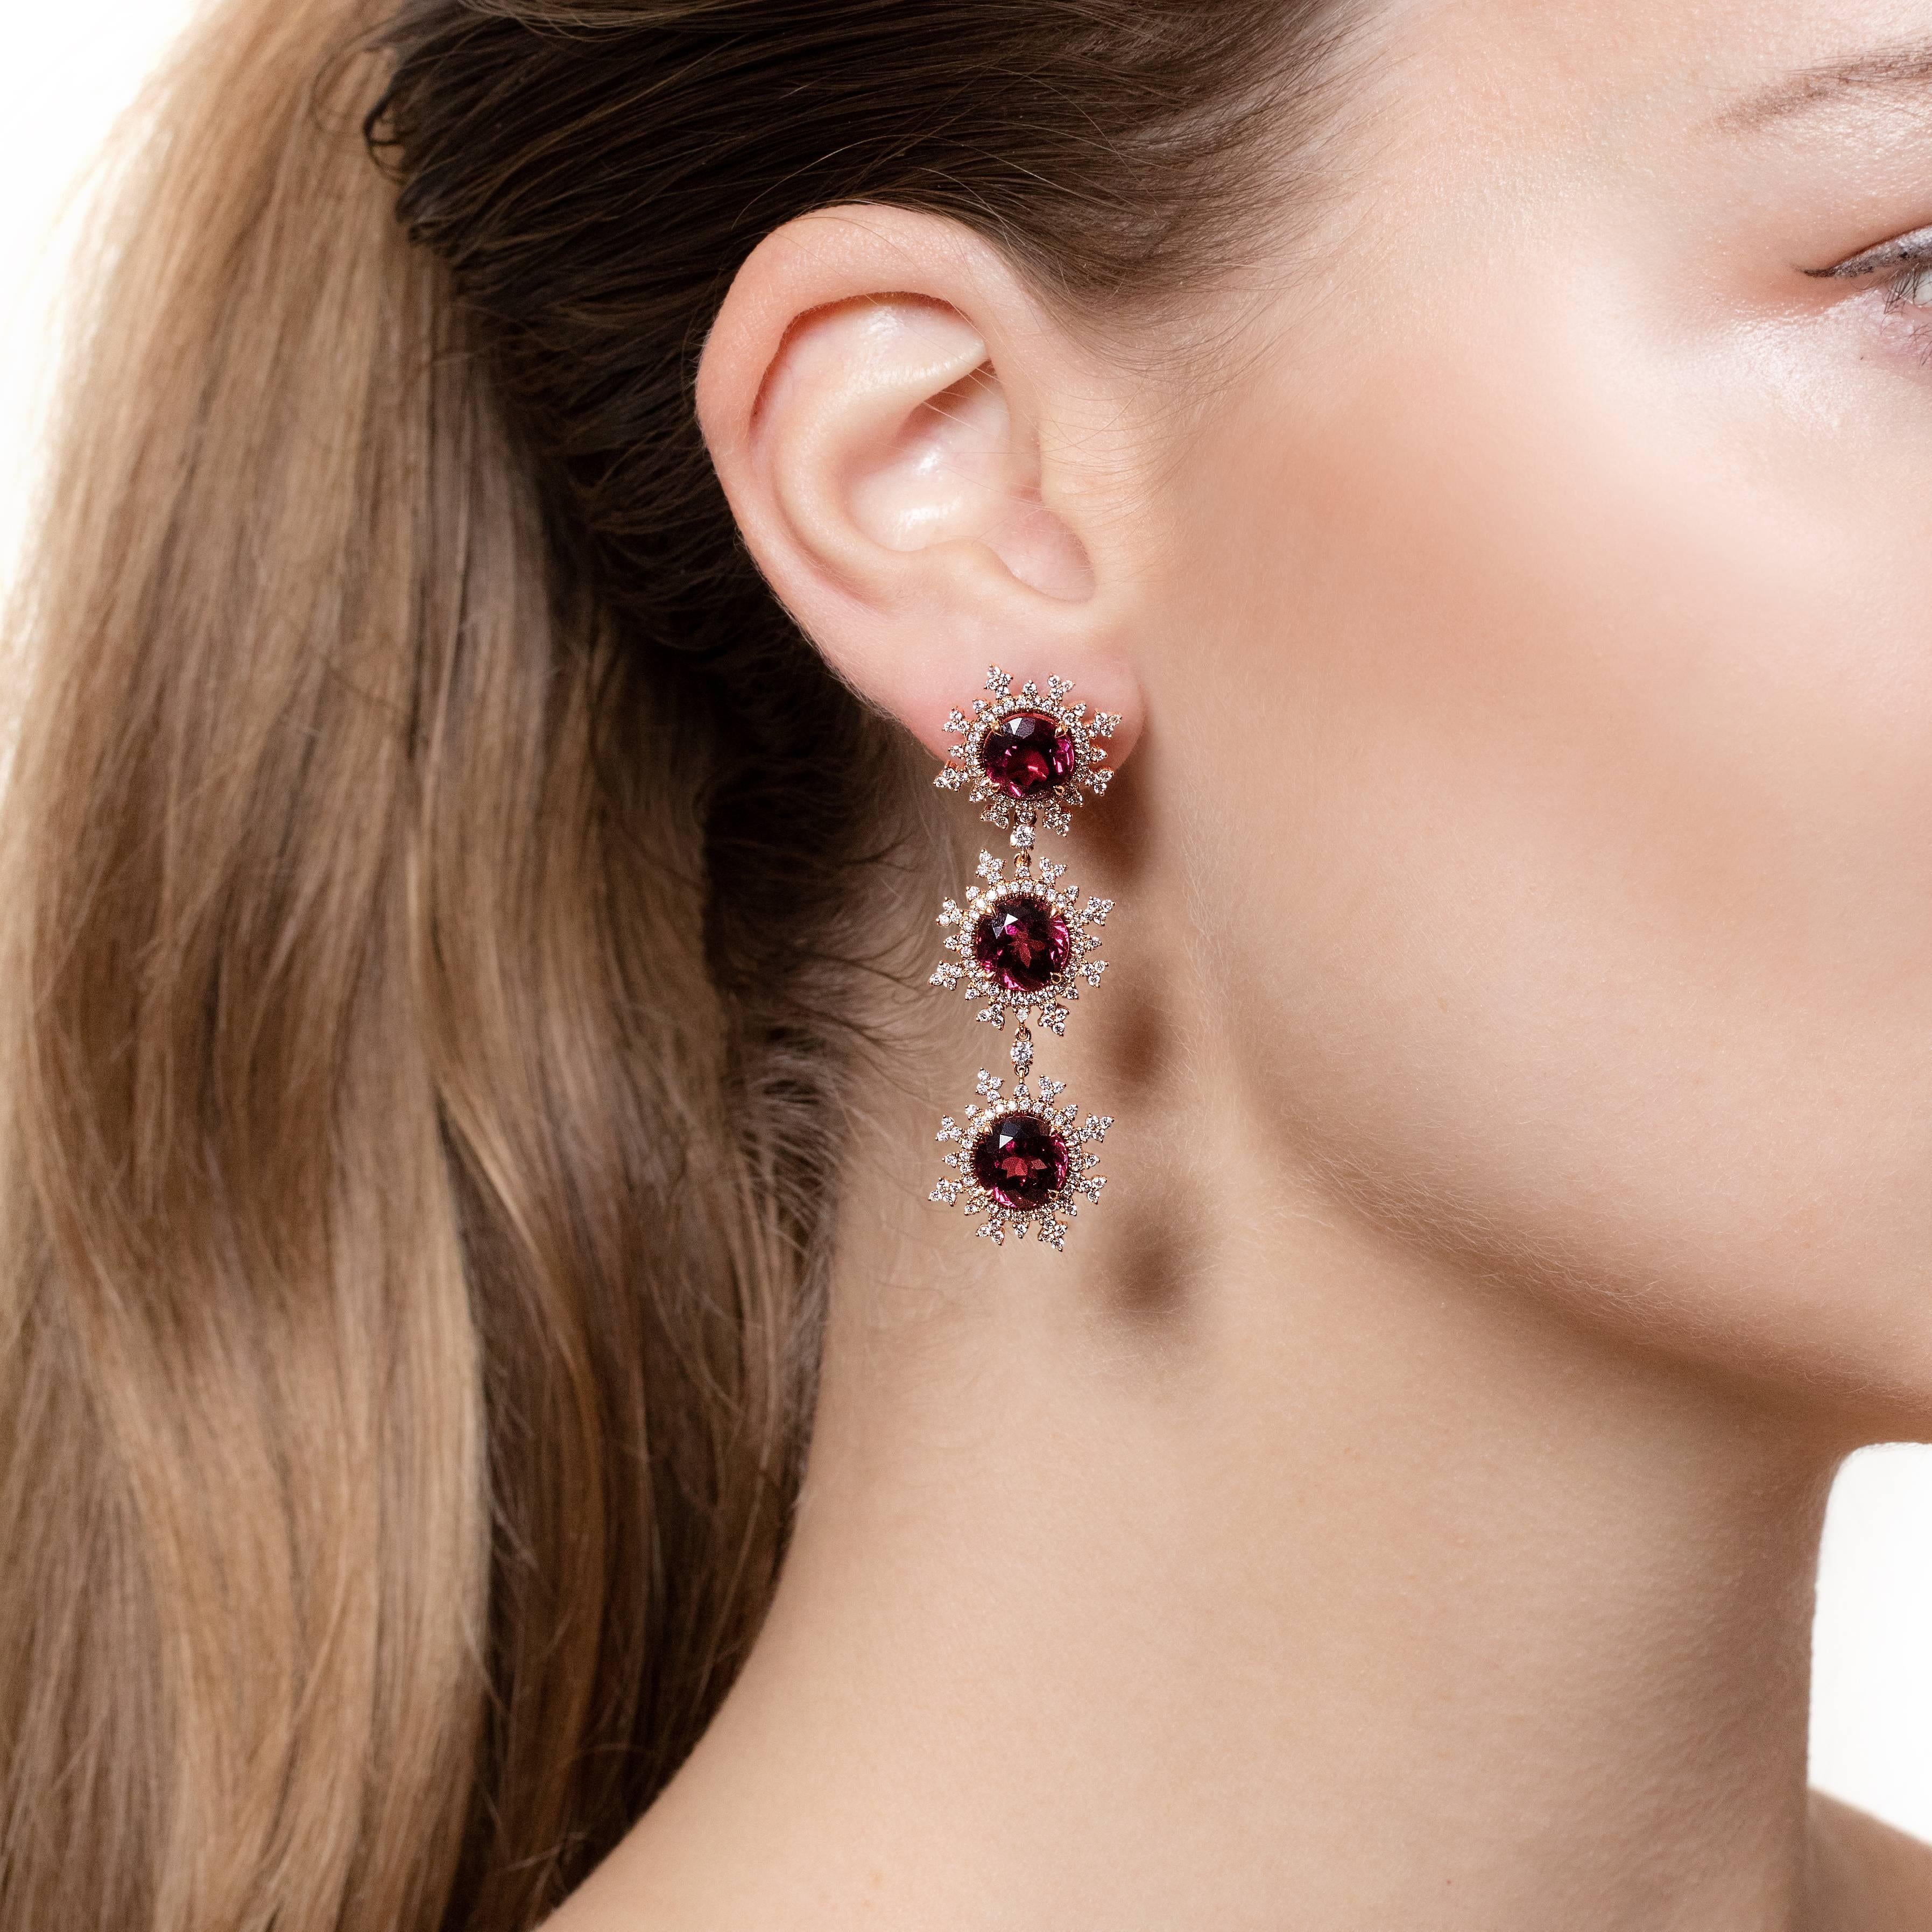 18ct. rose gold (12.0g), 6 red rhodolite 14.6ct., 388 white round-cut diamonds 1.62ct.

A stunning pair of long detachable flake earrings that are made from 18ct. rose gold with 3 raspberry red rhodolite stones on each earring that are surrounded by